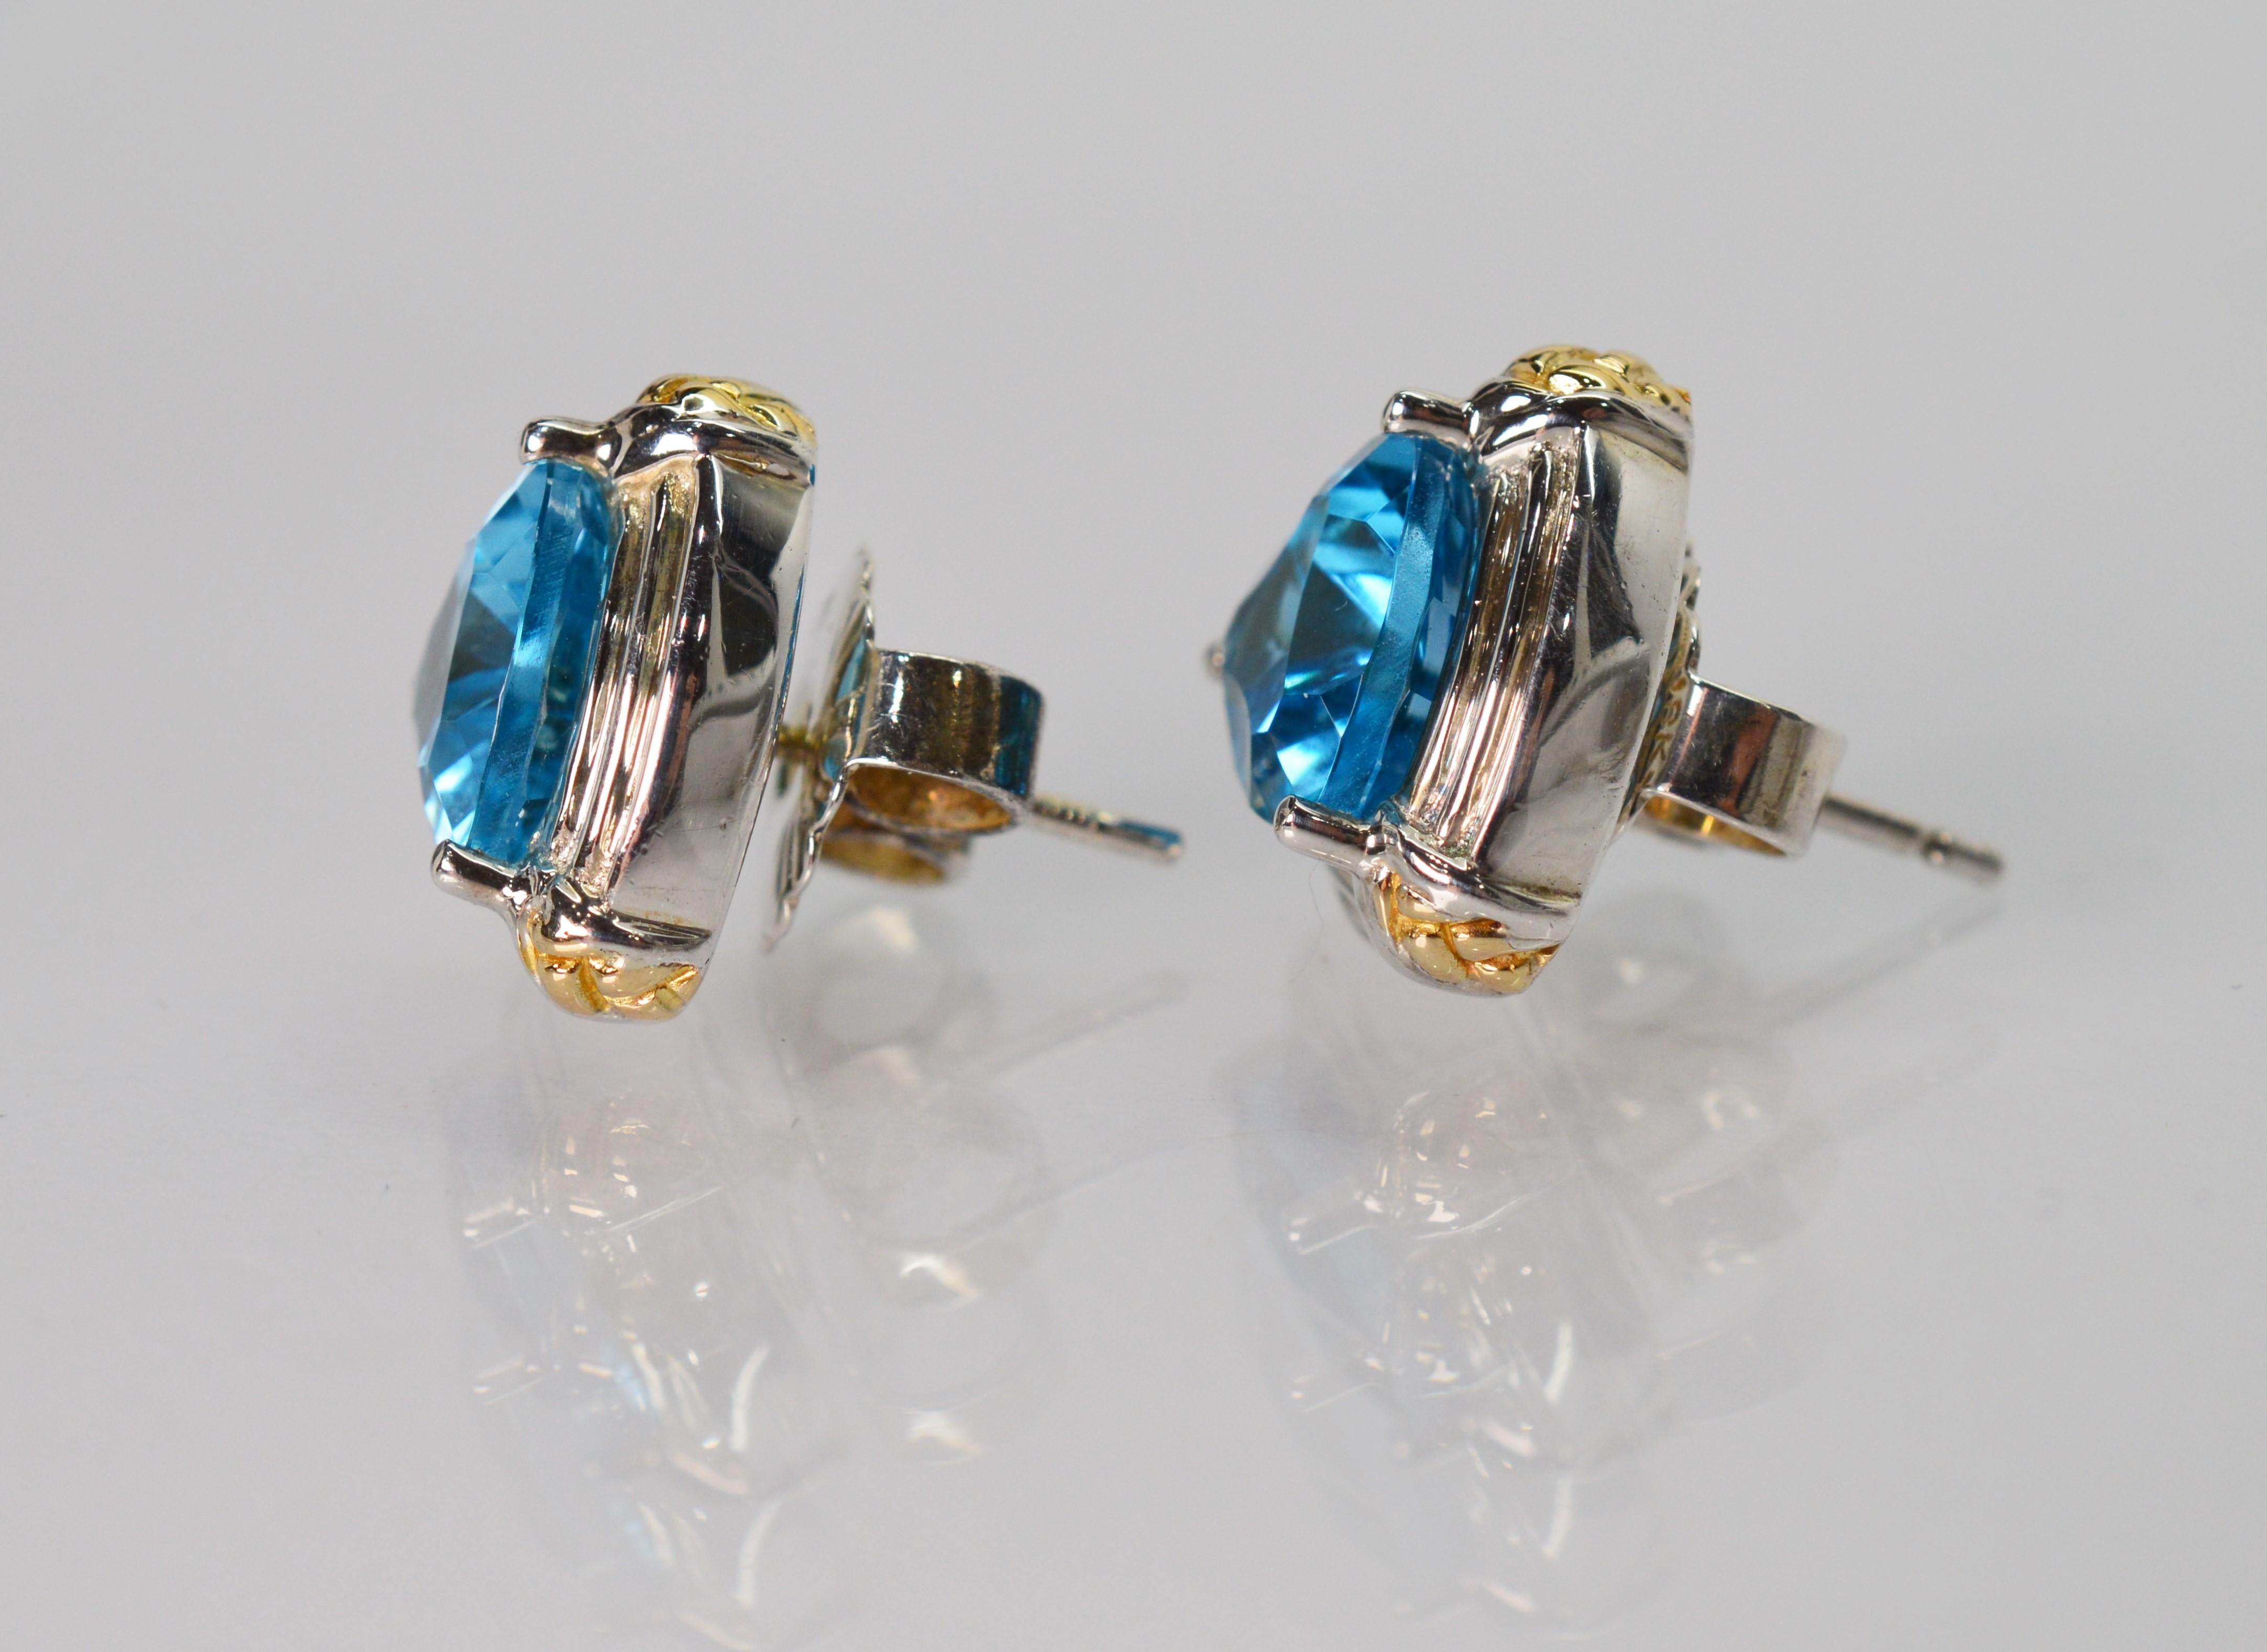 Vibrant London Blue Topaz beam from this cheerful pair of earrings by Lorenzo. Crafted in .925 sterling silver and accented with .750 yellow gold,
each stud showcases a 2.5 carat stone. For pierced ears with post and fancy butterfly closure. Gift